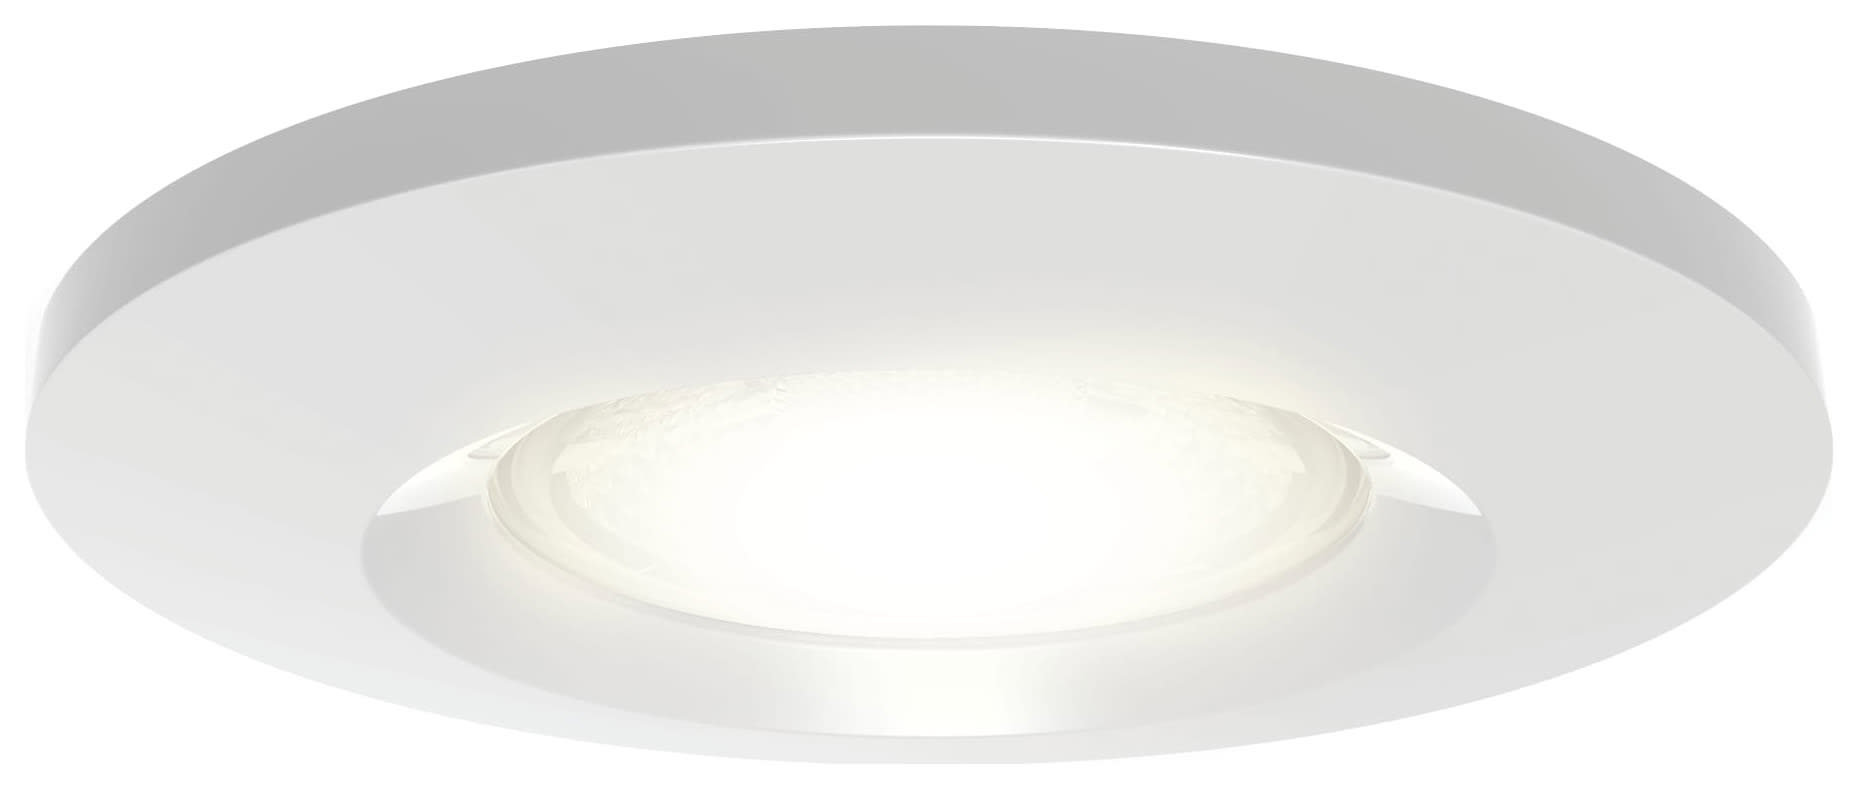 4Lite IP65 LED 4000K Fire Rated Downlight -